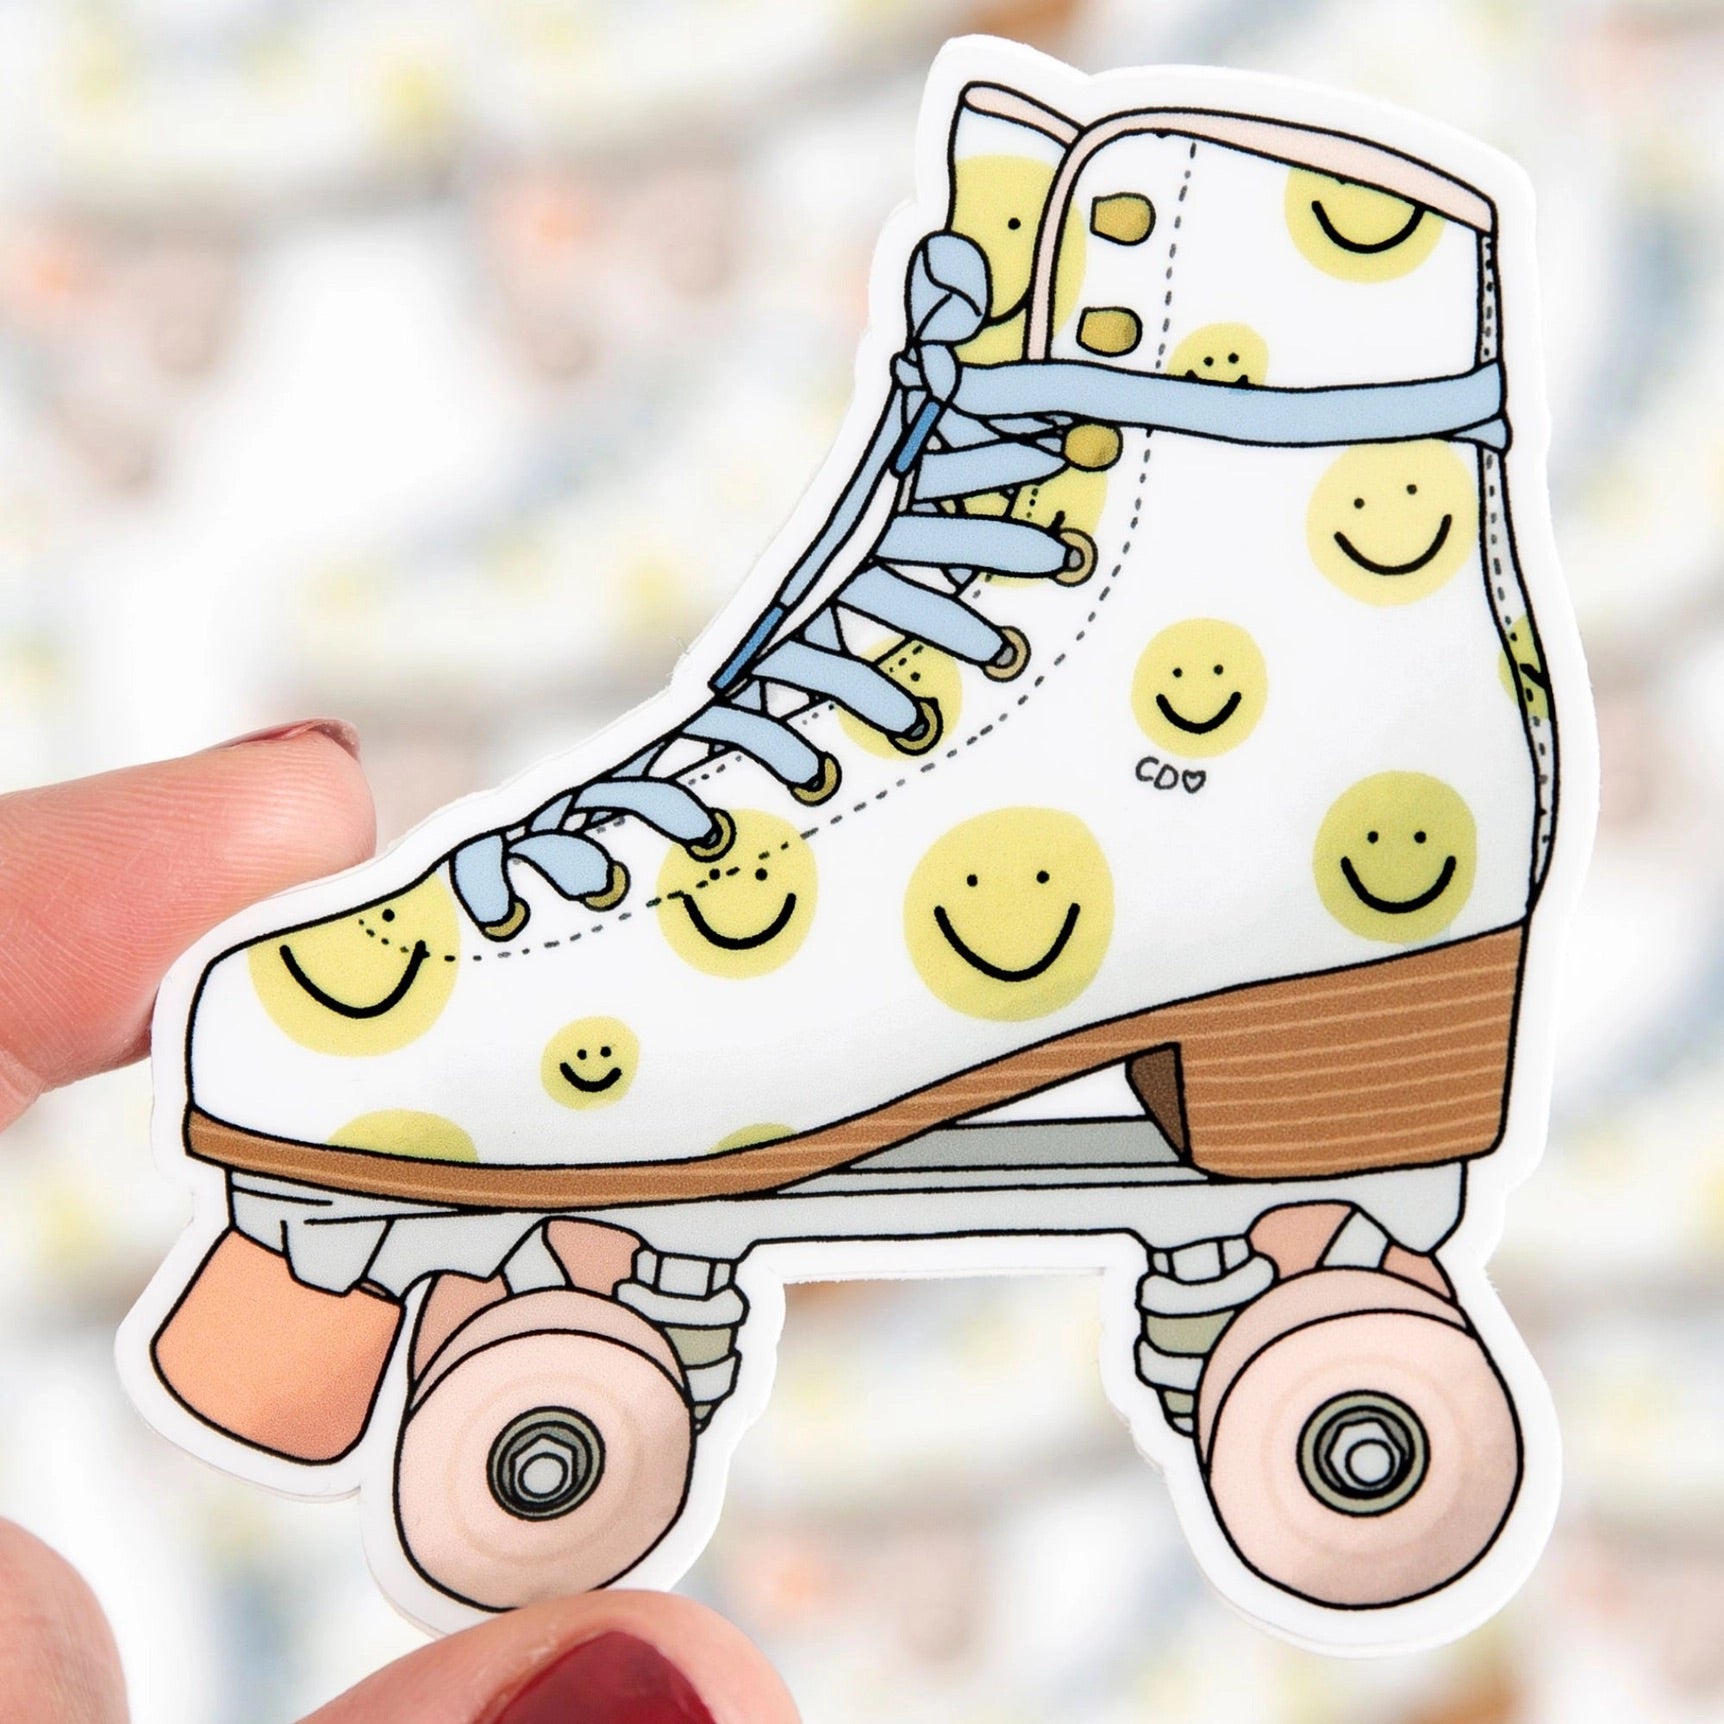 Roller Skate Sticker – Calligraphy Creations In KY